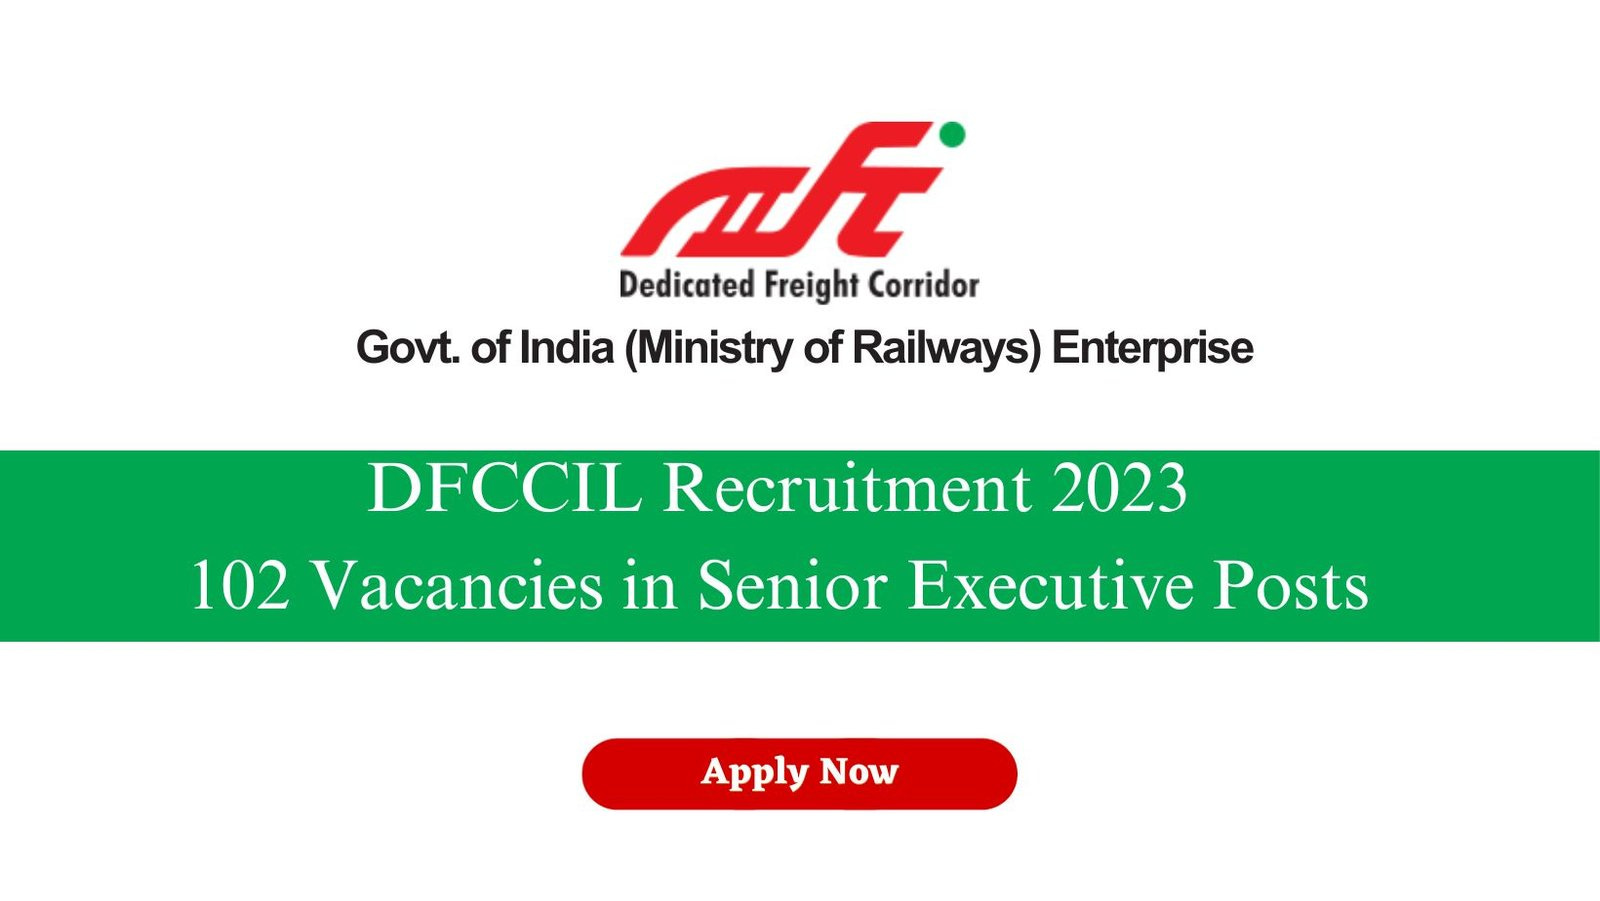 DFCCIL Recruitment 2023 Apply Now for 102 Vacancies in Senior Executive Posts